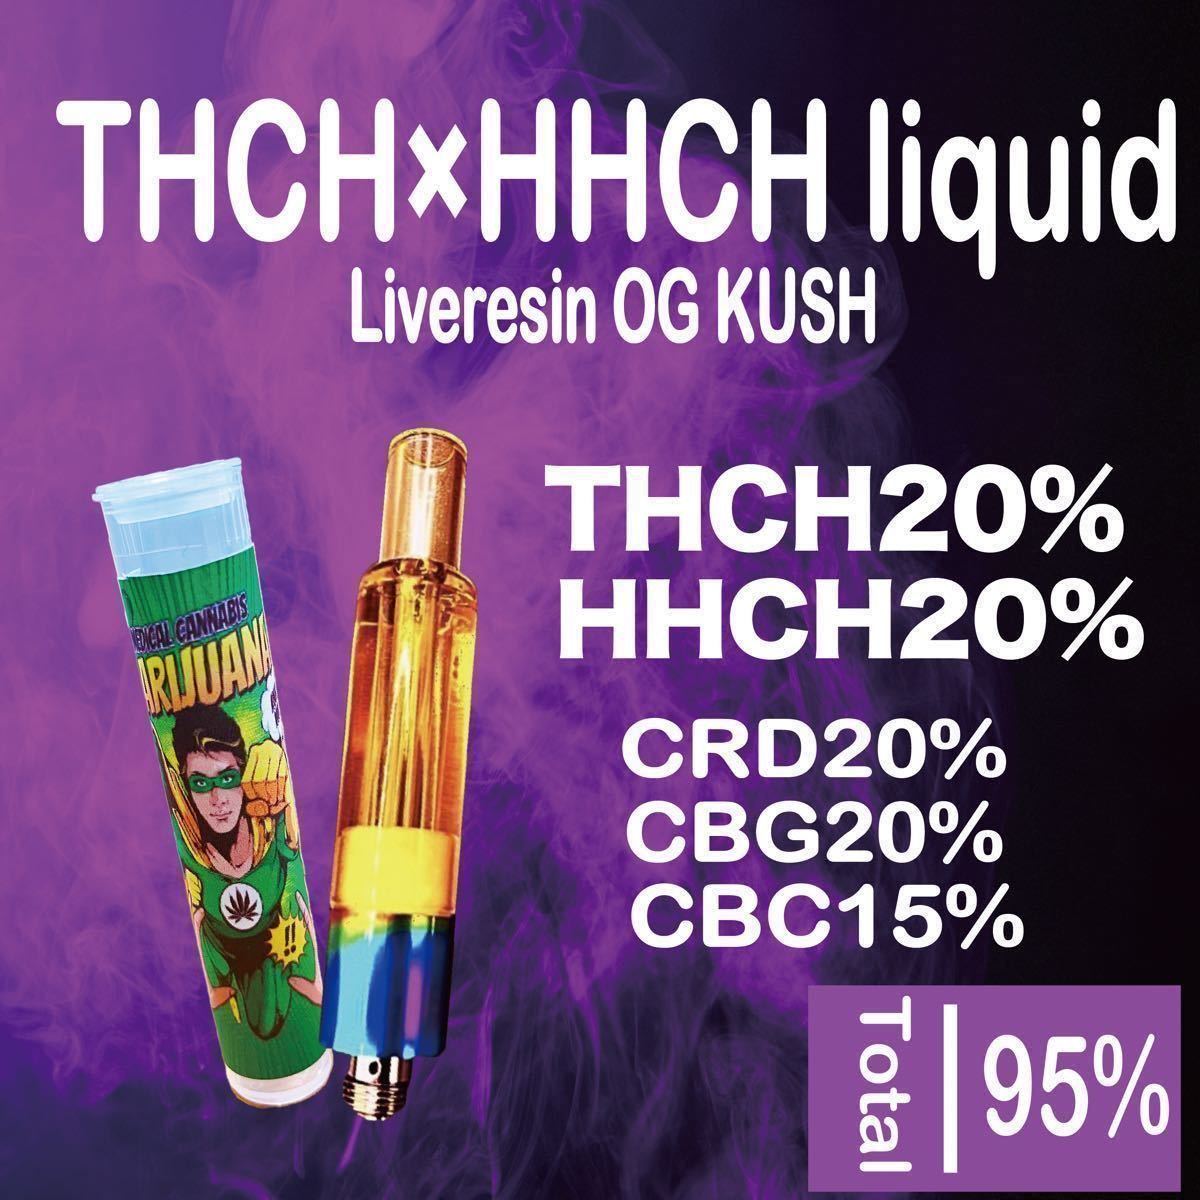 THCH 30% 1ml リキッド｜PayPayフリマ